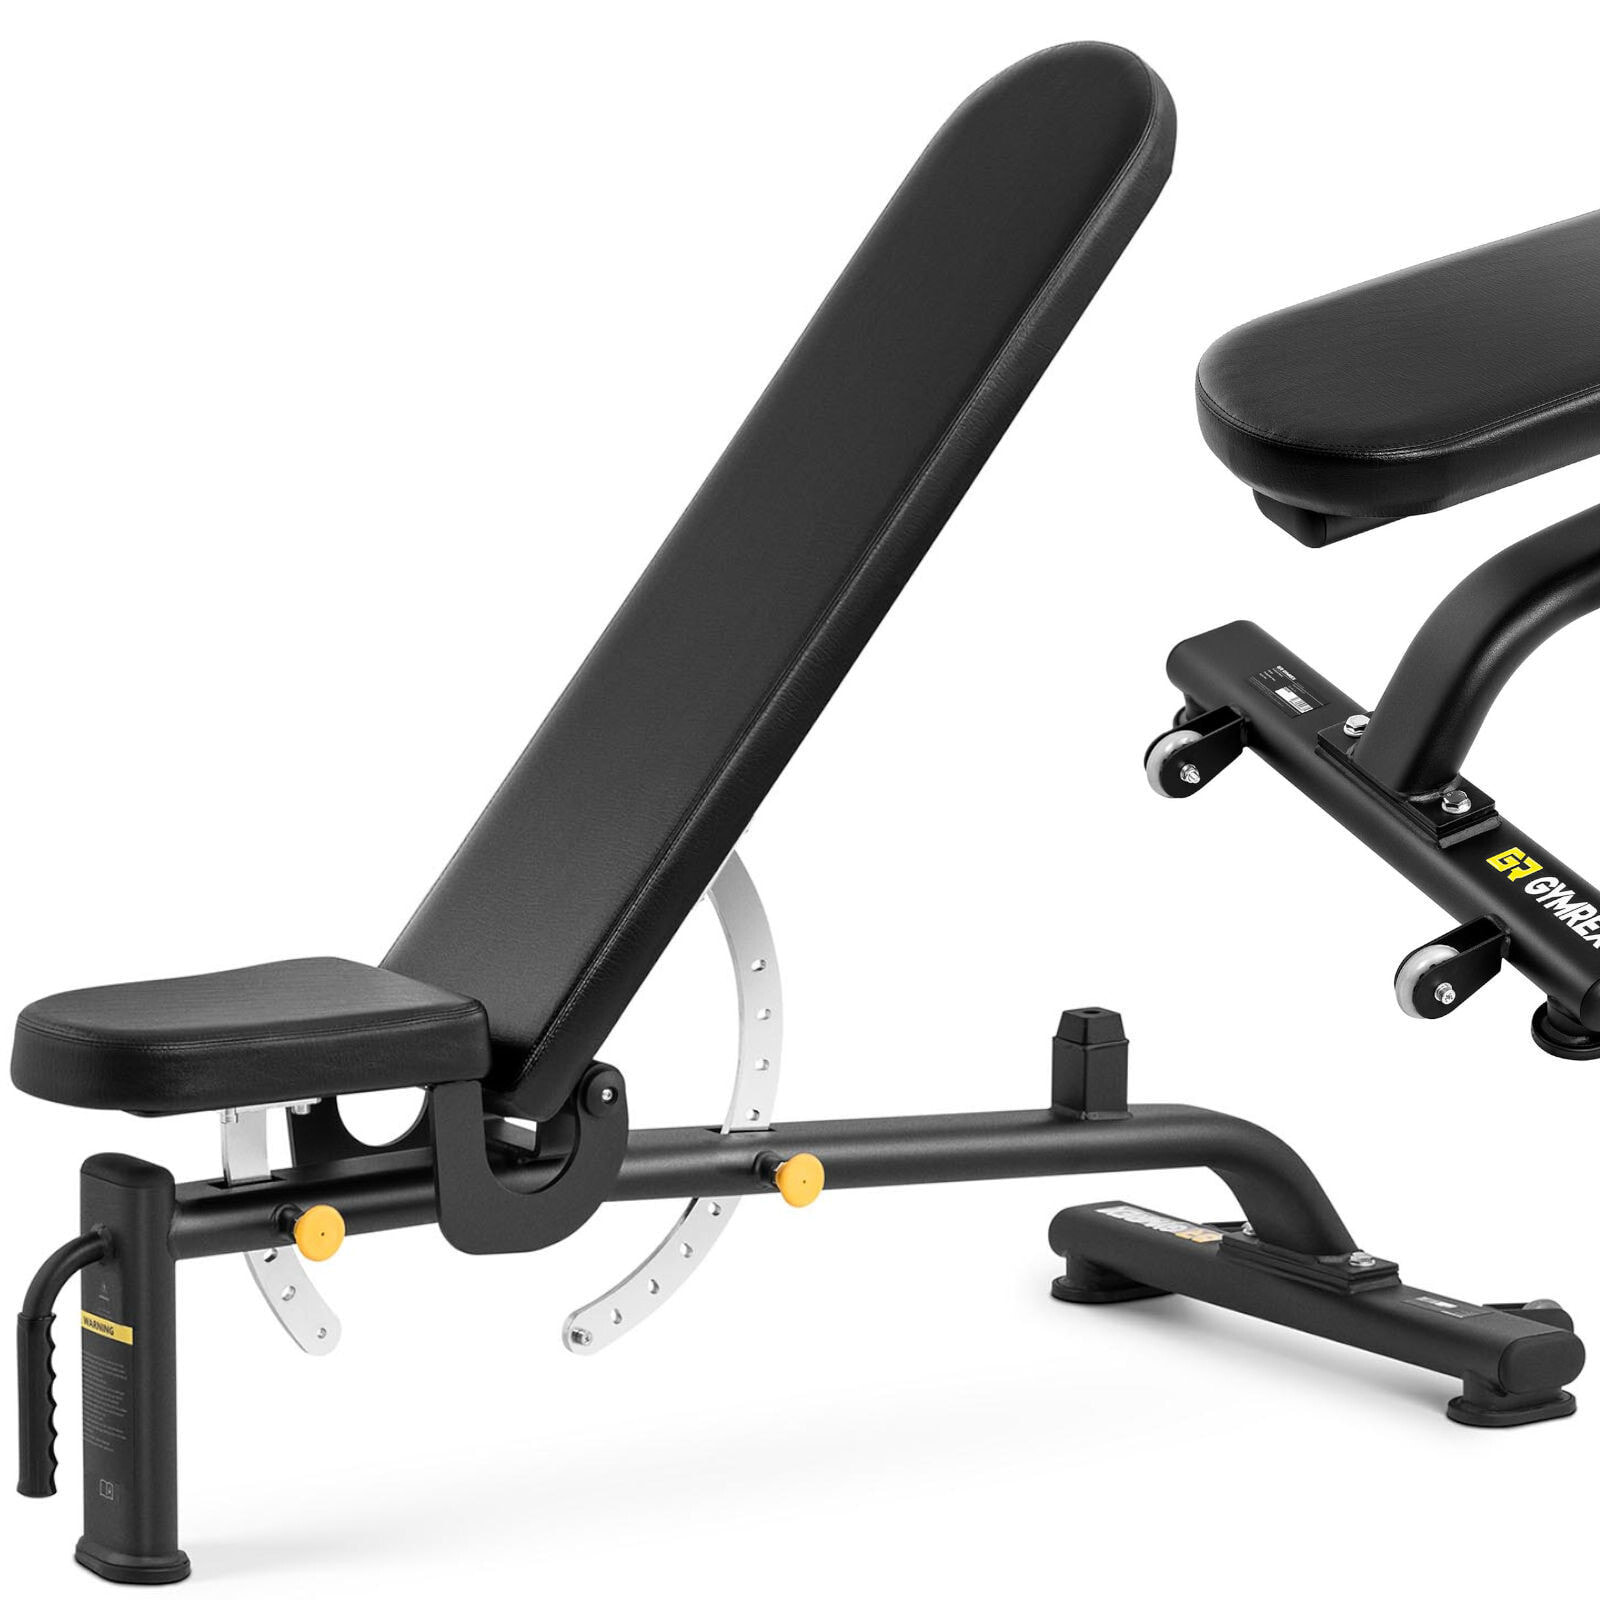 Exercise bench for exercises, adjustable, foldable 9 levels up to 135 kg